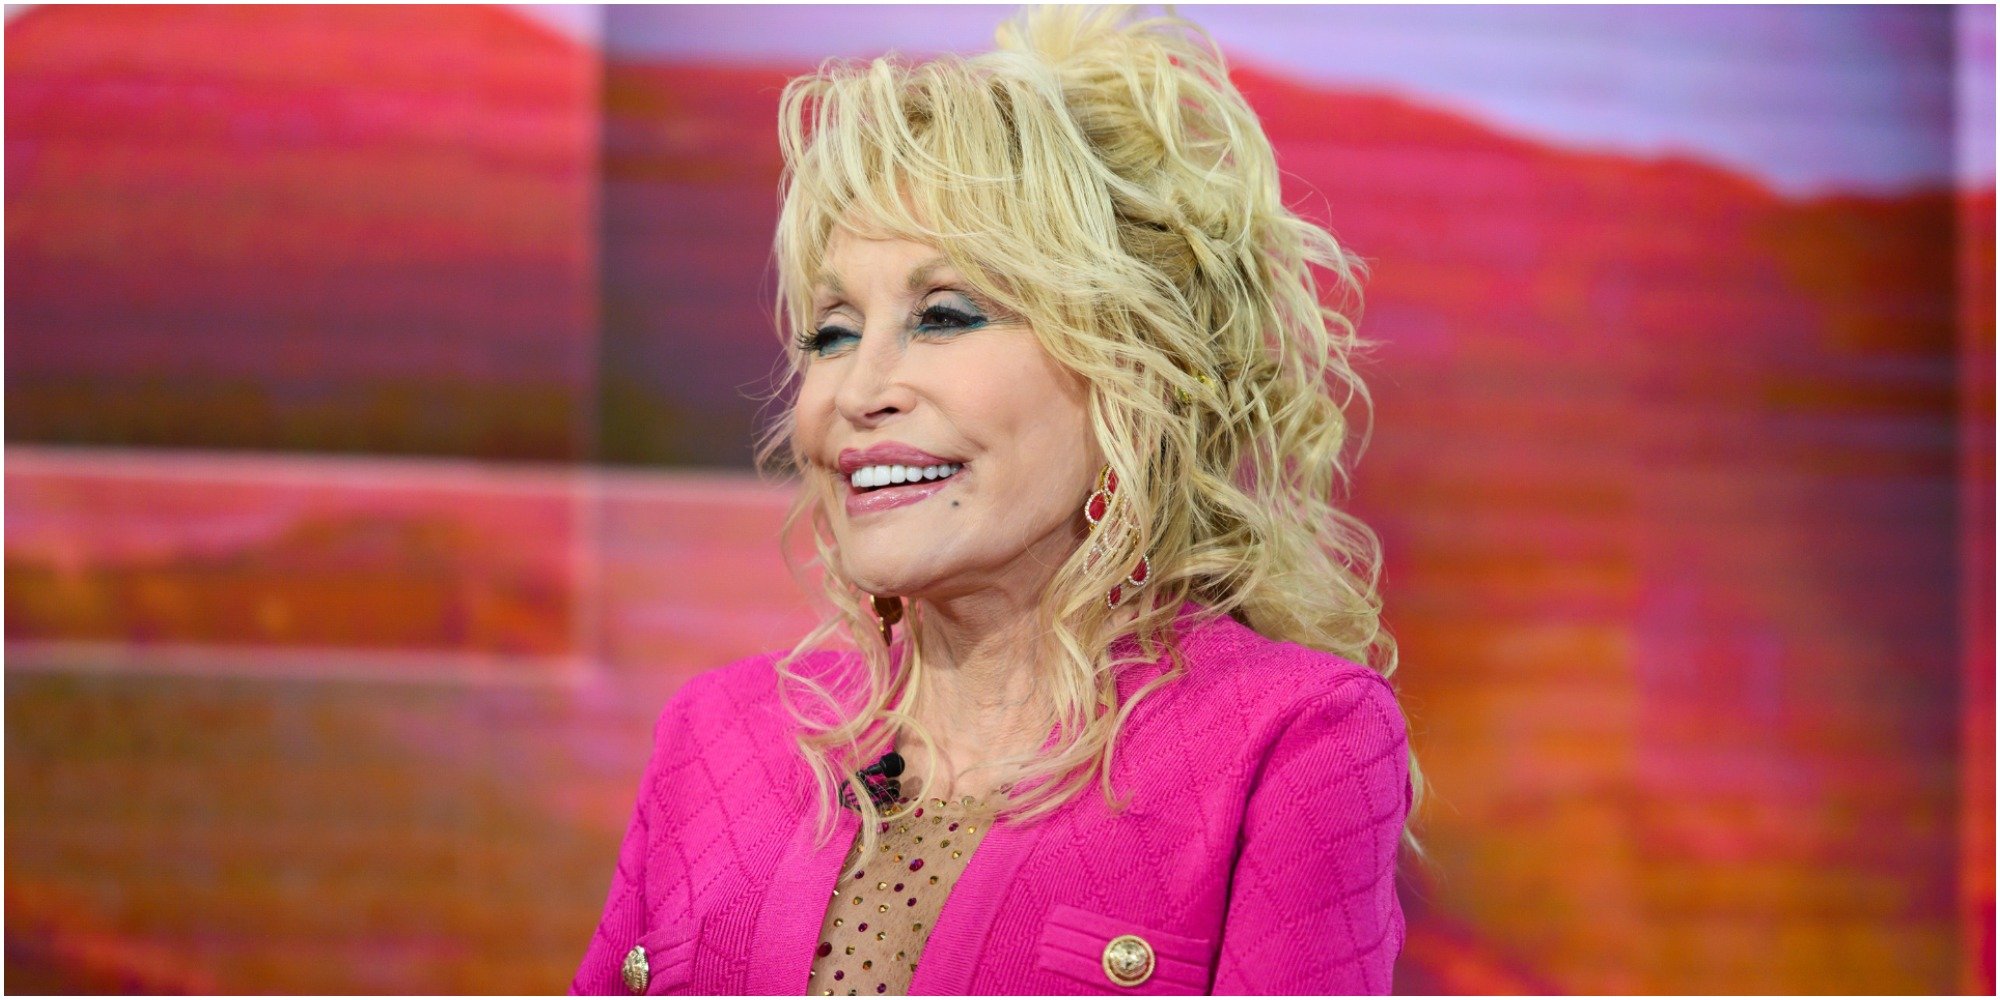 Dolly Parton Said of Her First Country Crossover Smash: ‘A Monkey Could Sing This Song and Have a Hit With It’